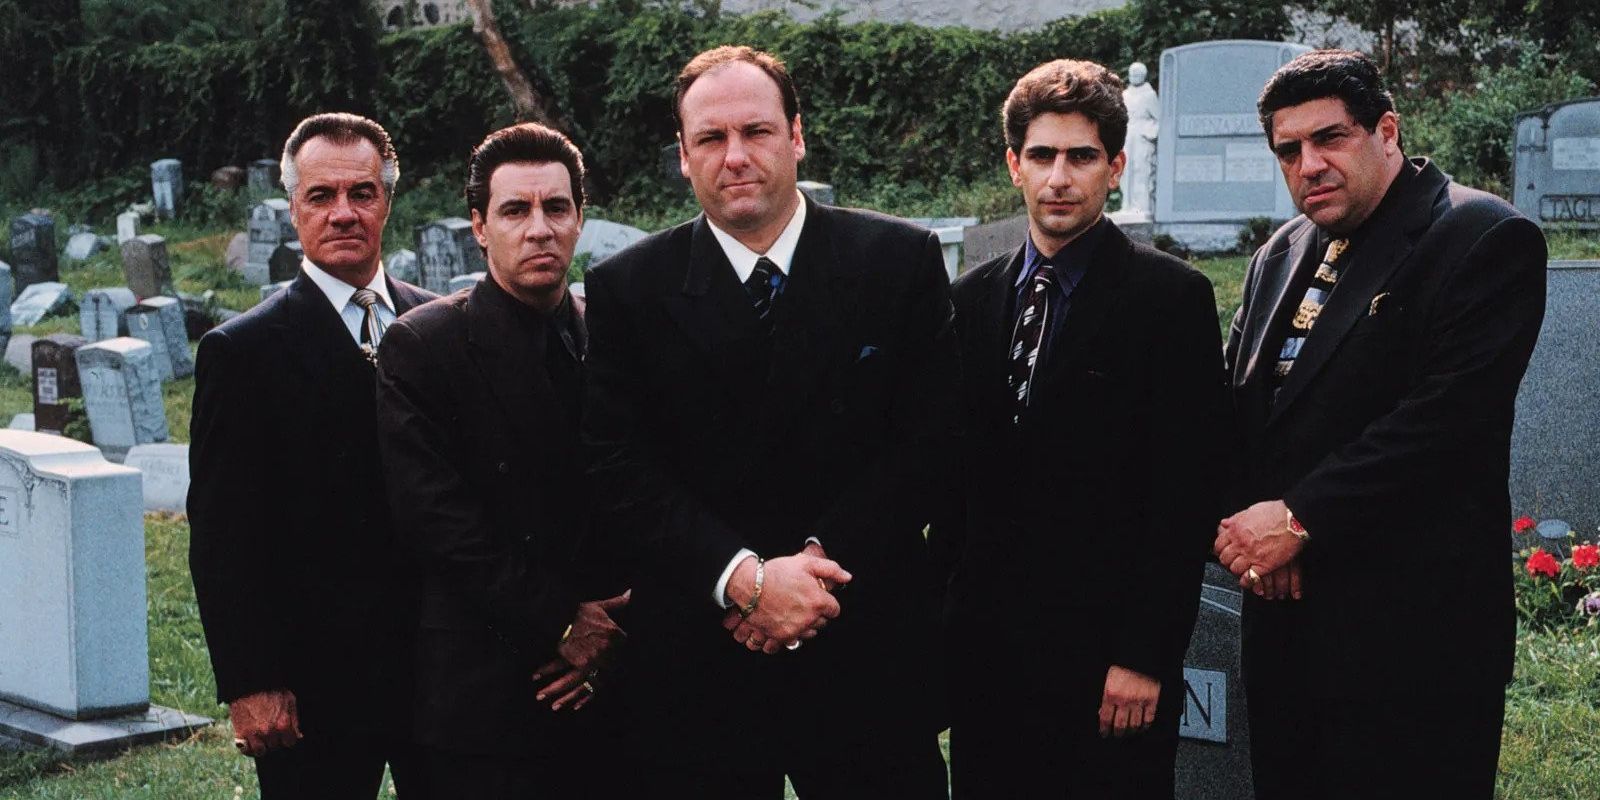 Tony Soprano, played by James Gandolfini, and members of his crime family visit a cemetery.